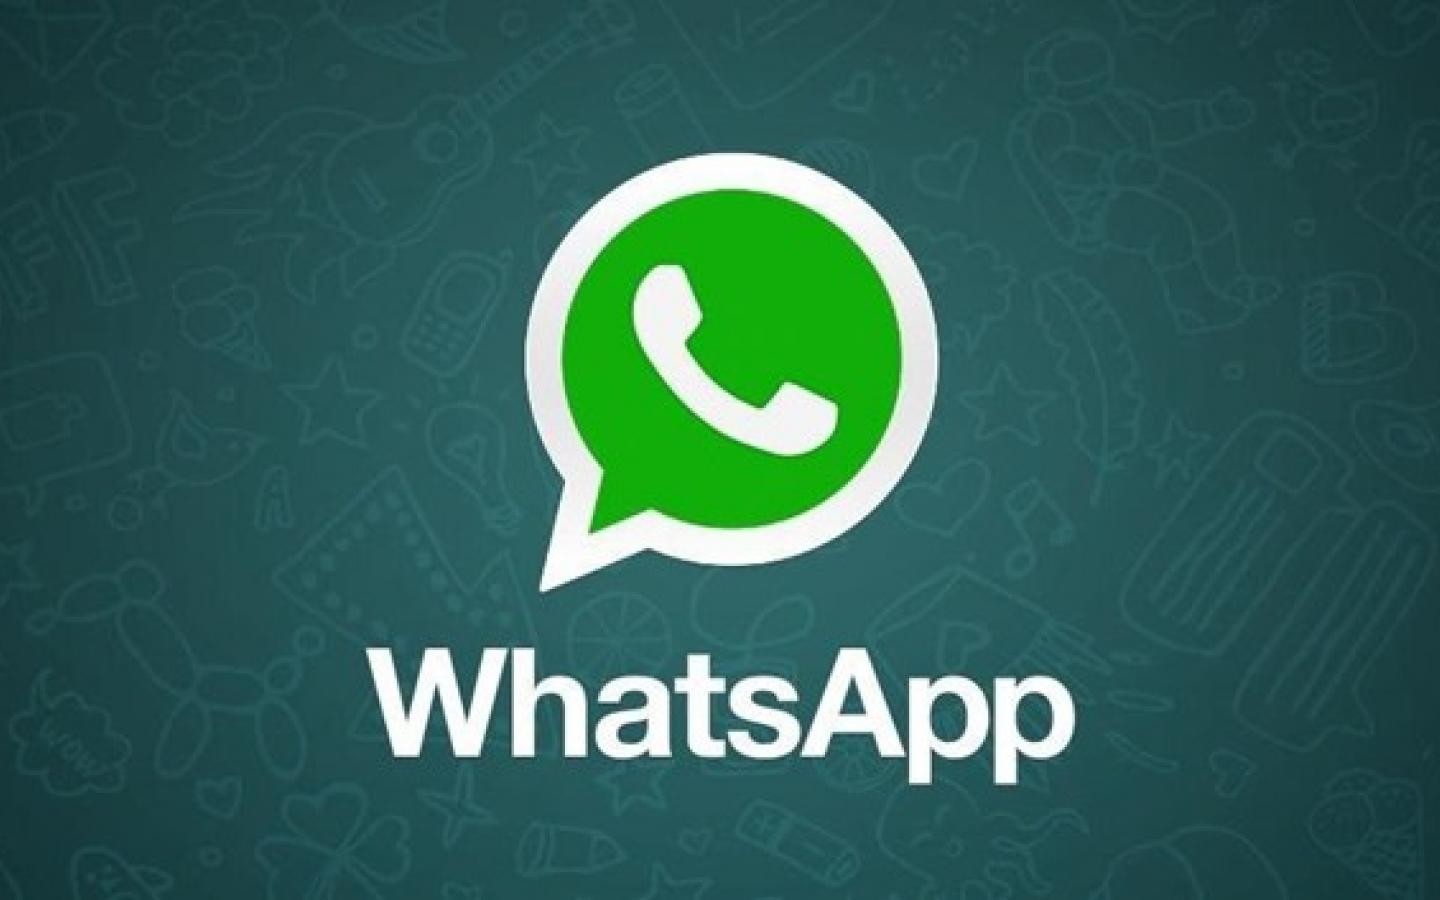 More privacy for Android users; WhatsApp working on fingerprint authentication for chats